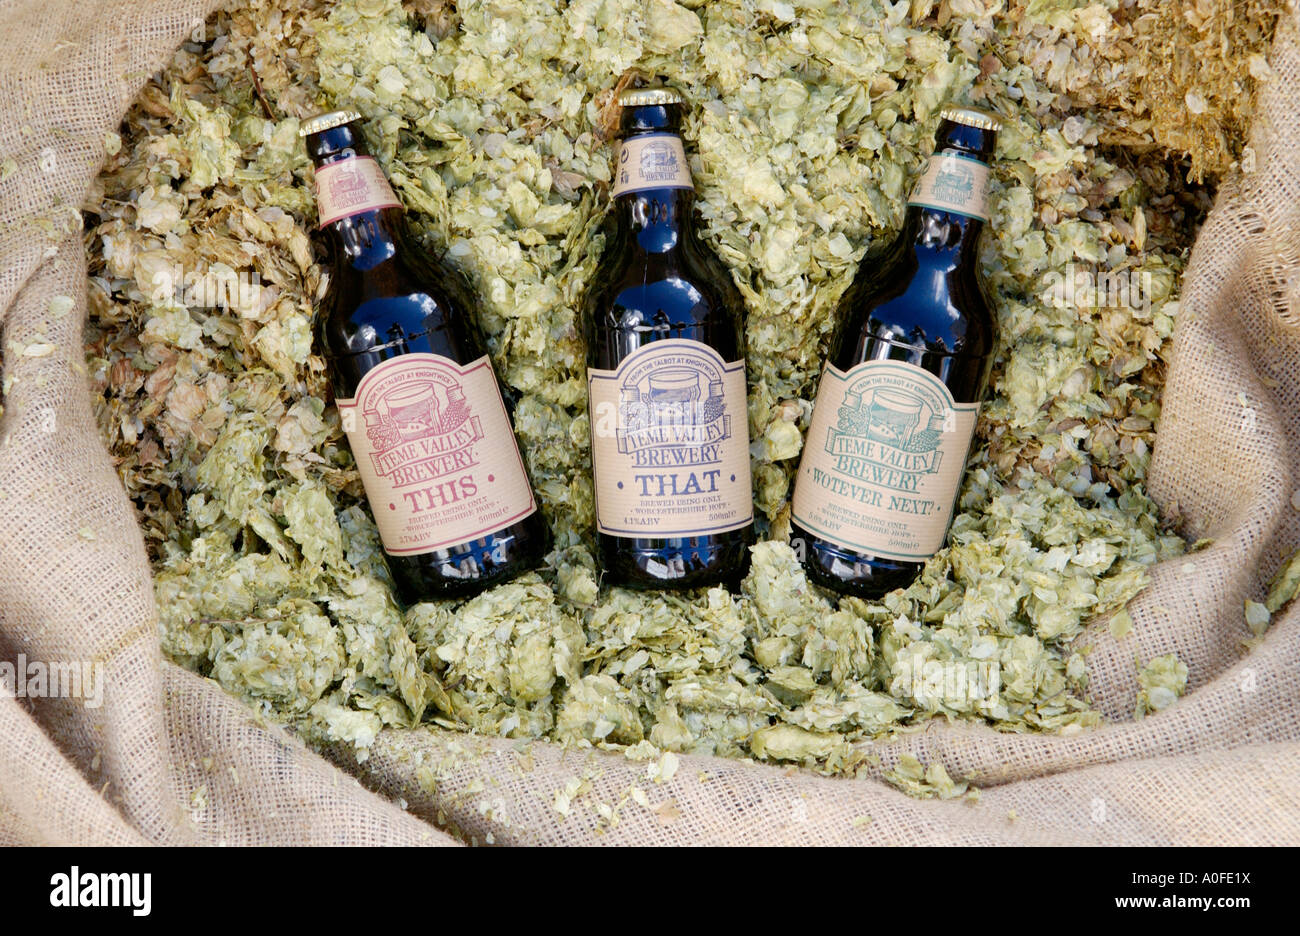 THIS THAT & WOTEVER NEXT beer on sack of hops made in Teme Valley Brewery behind The Talbot at Knightwick Worcestershire England Stock Photo